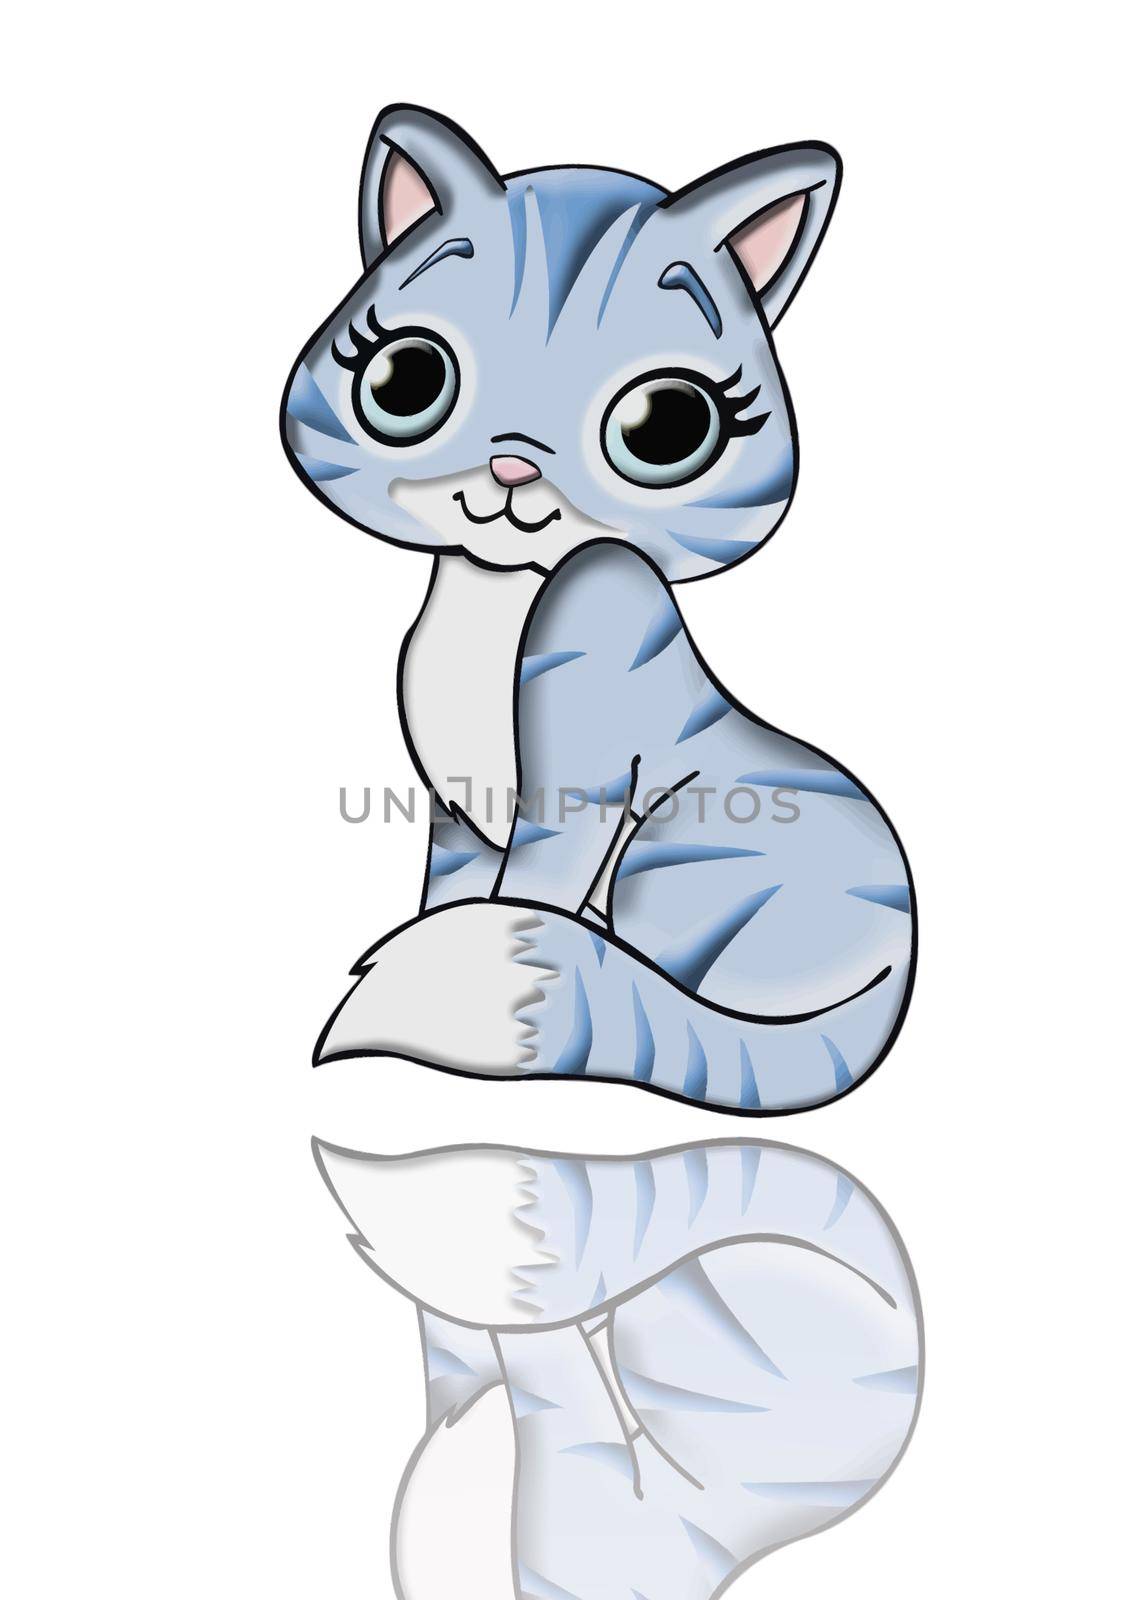 very cute cat on white background - 3d rendering by mariephotos